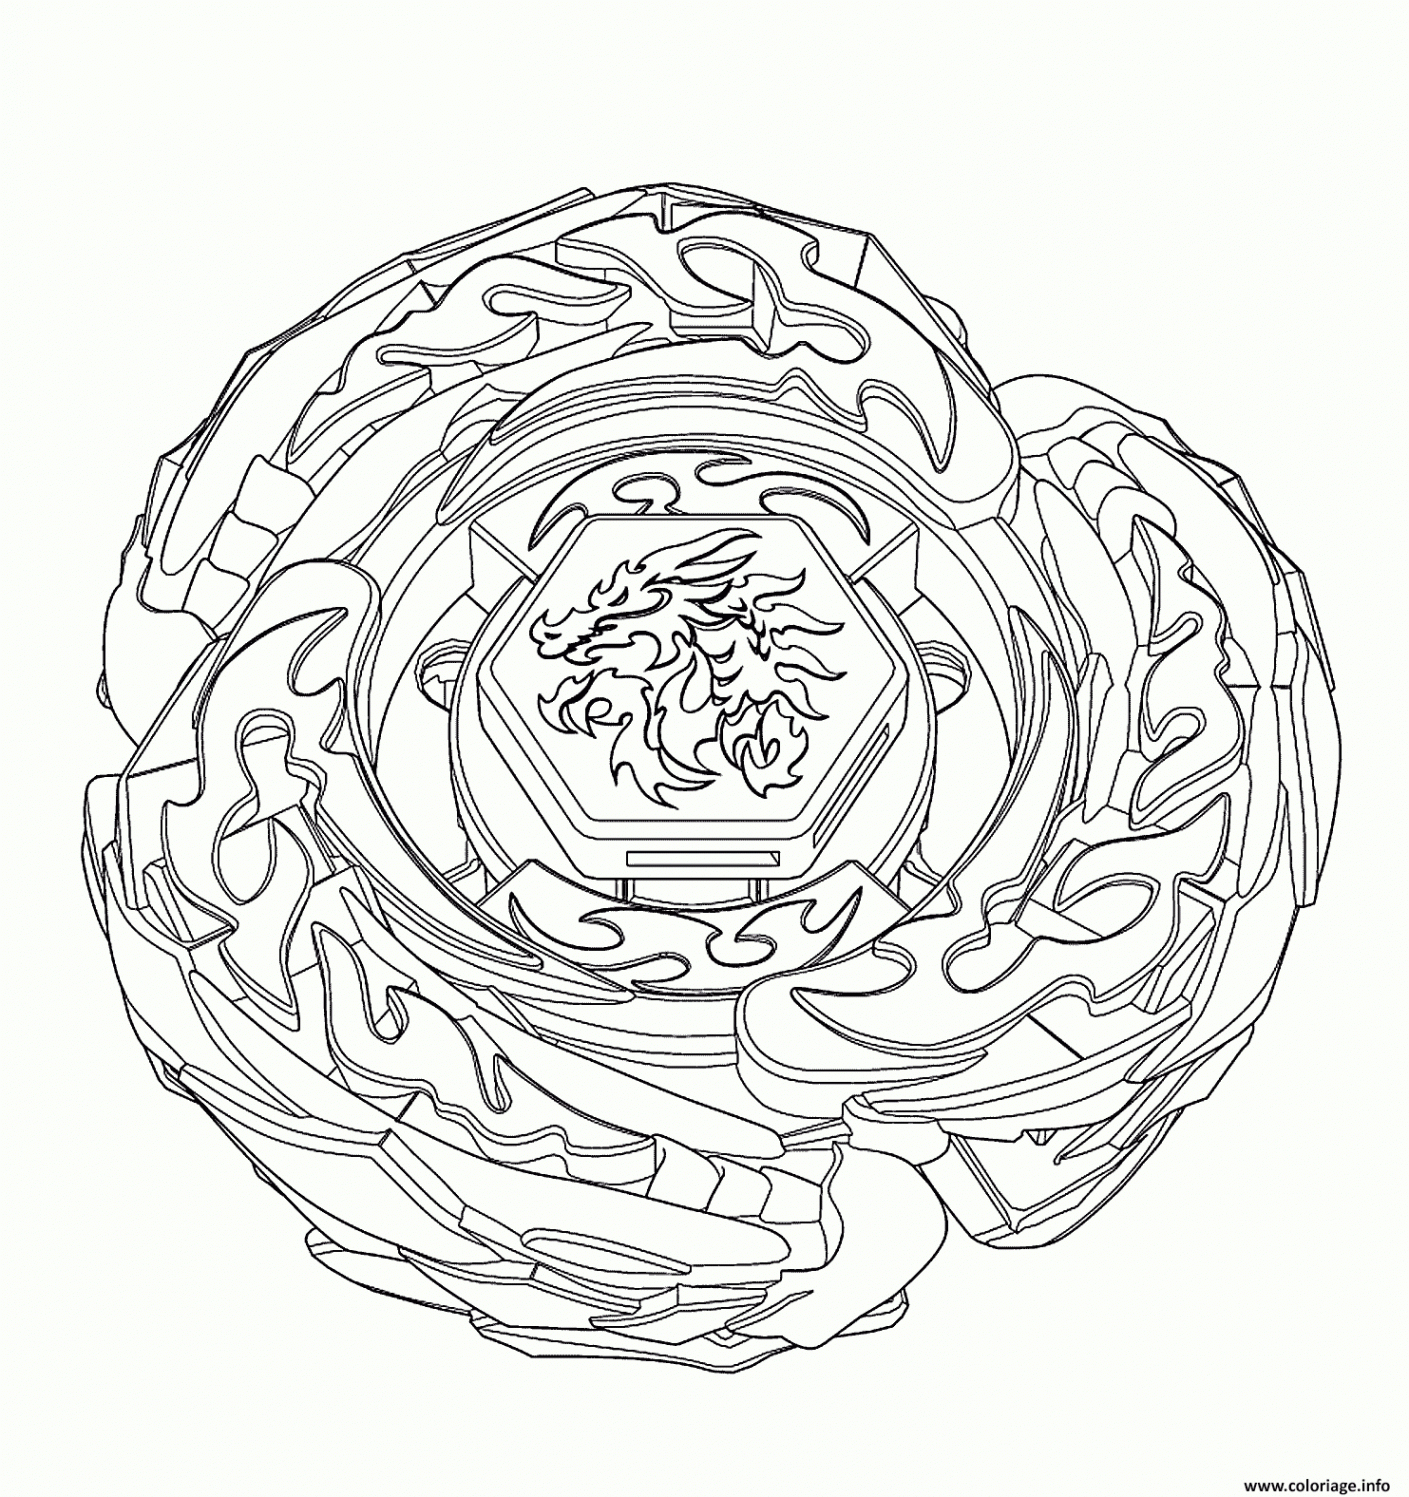 Coloriage beyblade